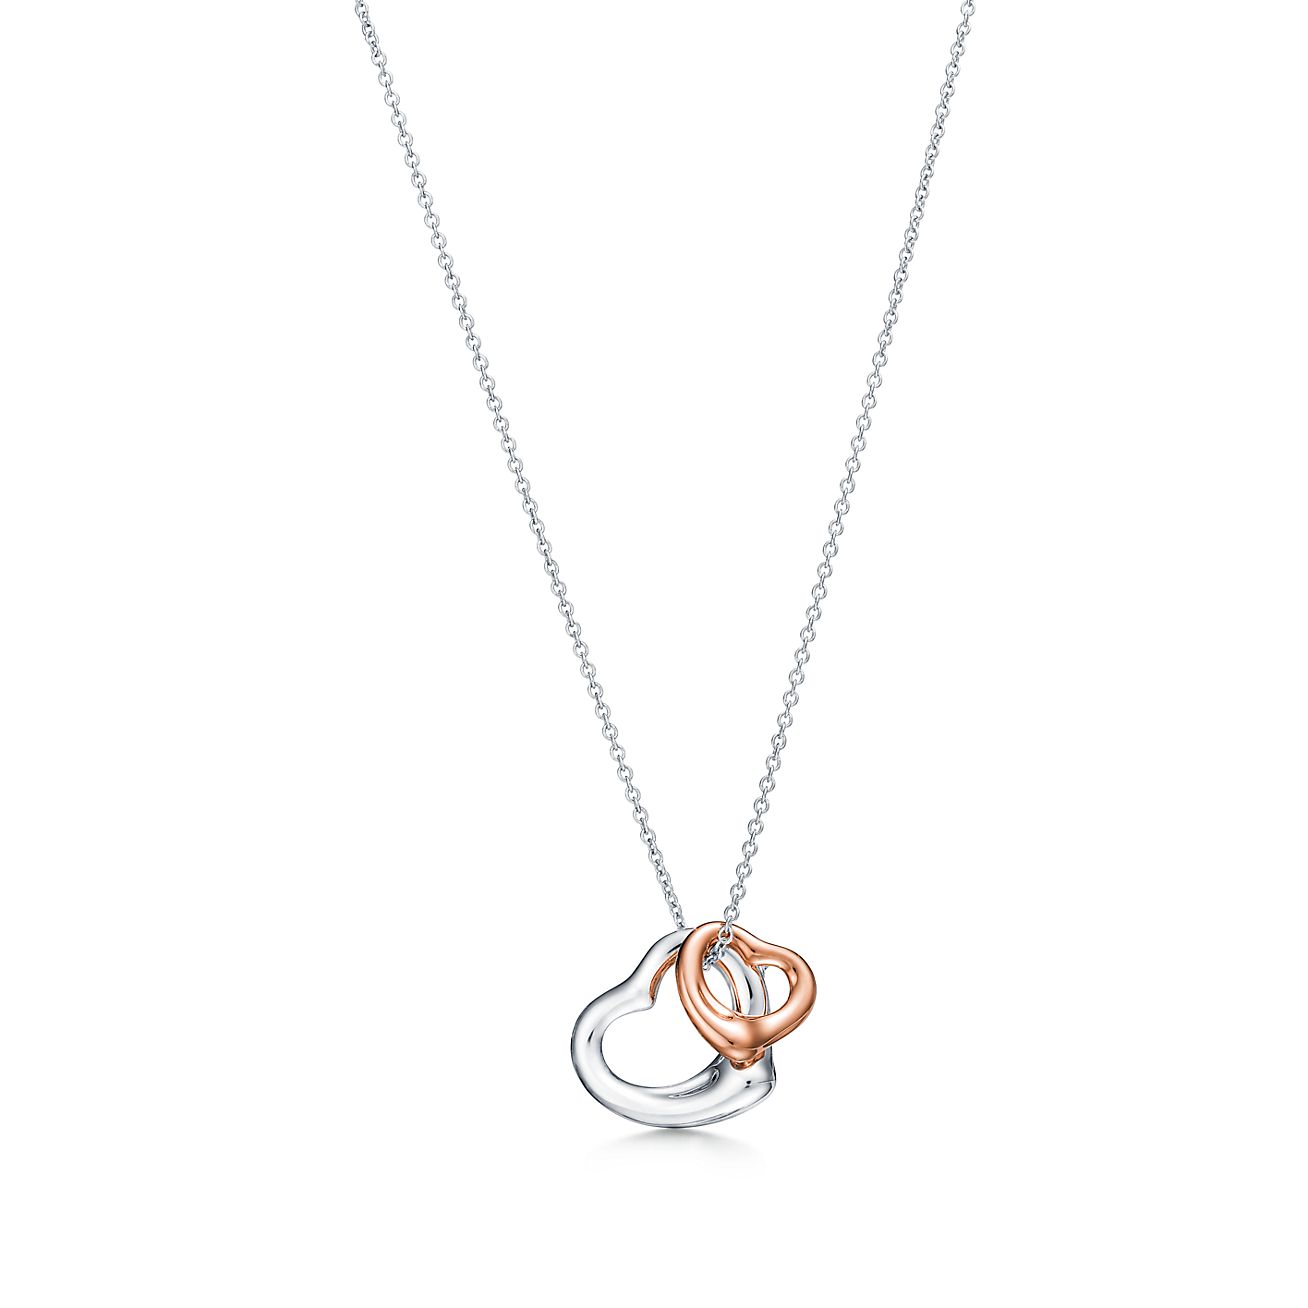 Elsa Peretti® Open Heart pendant in sterling silver and 18k rose 